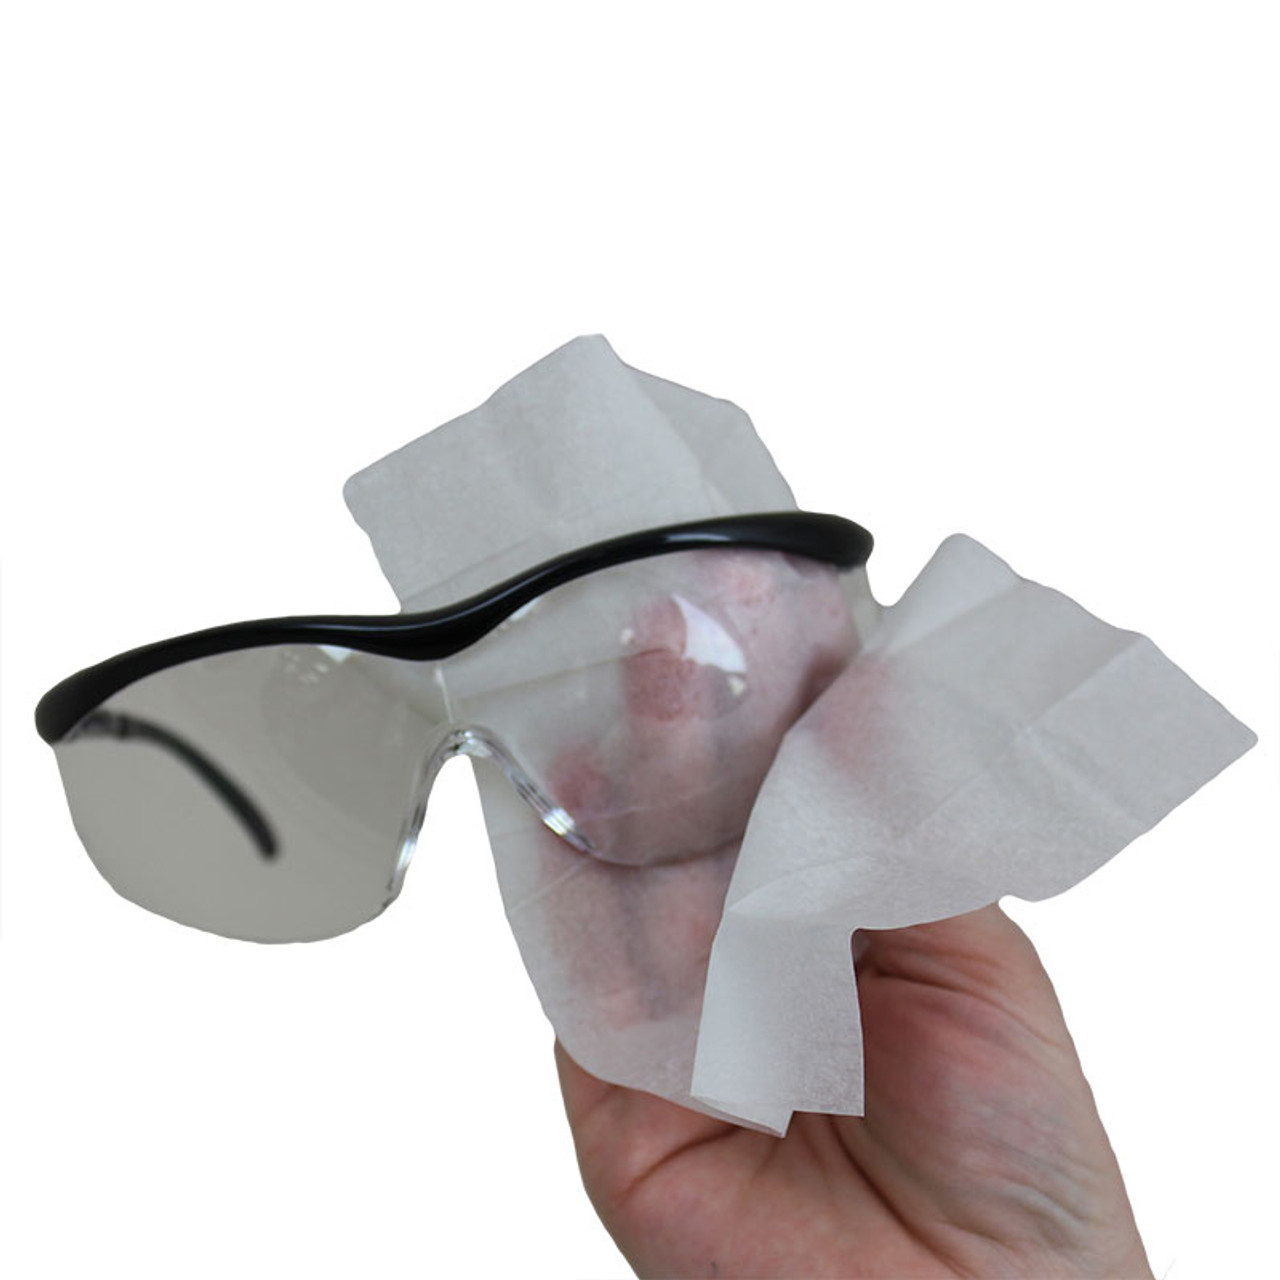 Zeiss Lens Eye Glass Cleaning Wipes Pre-moistened Alcohol Wipes